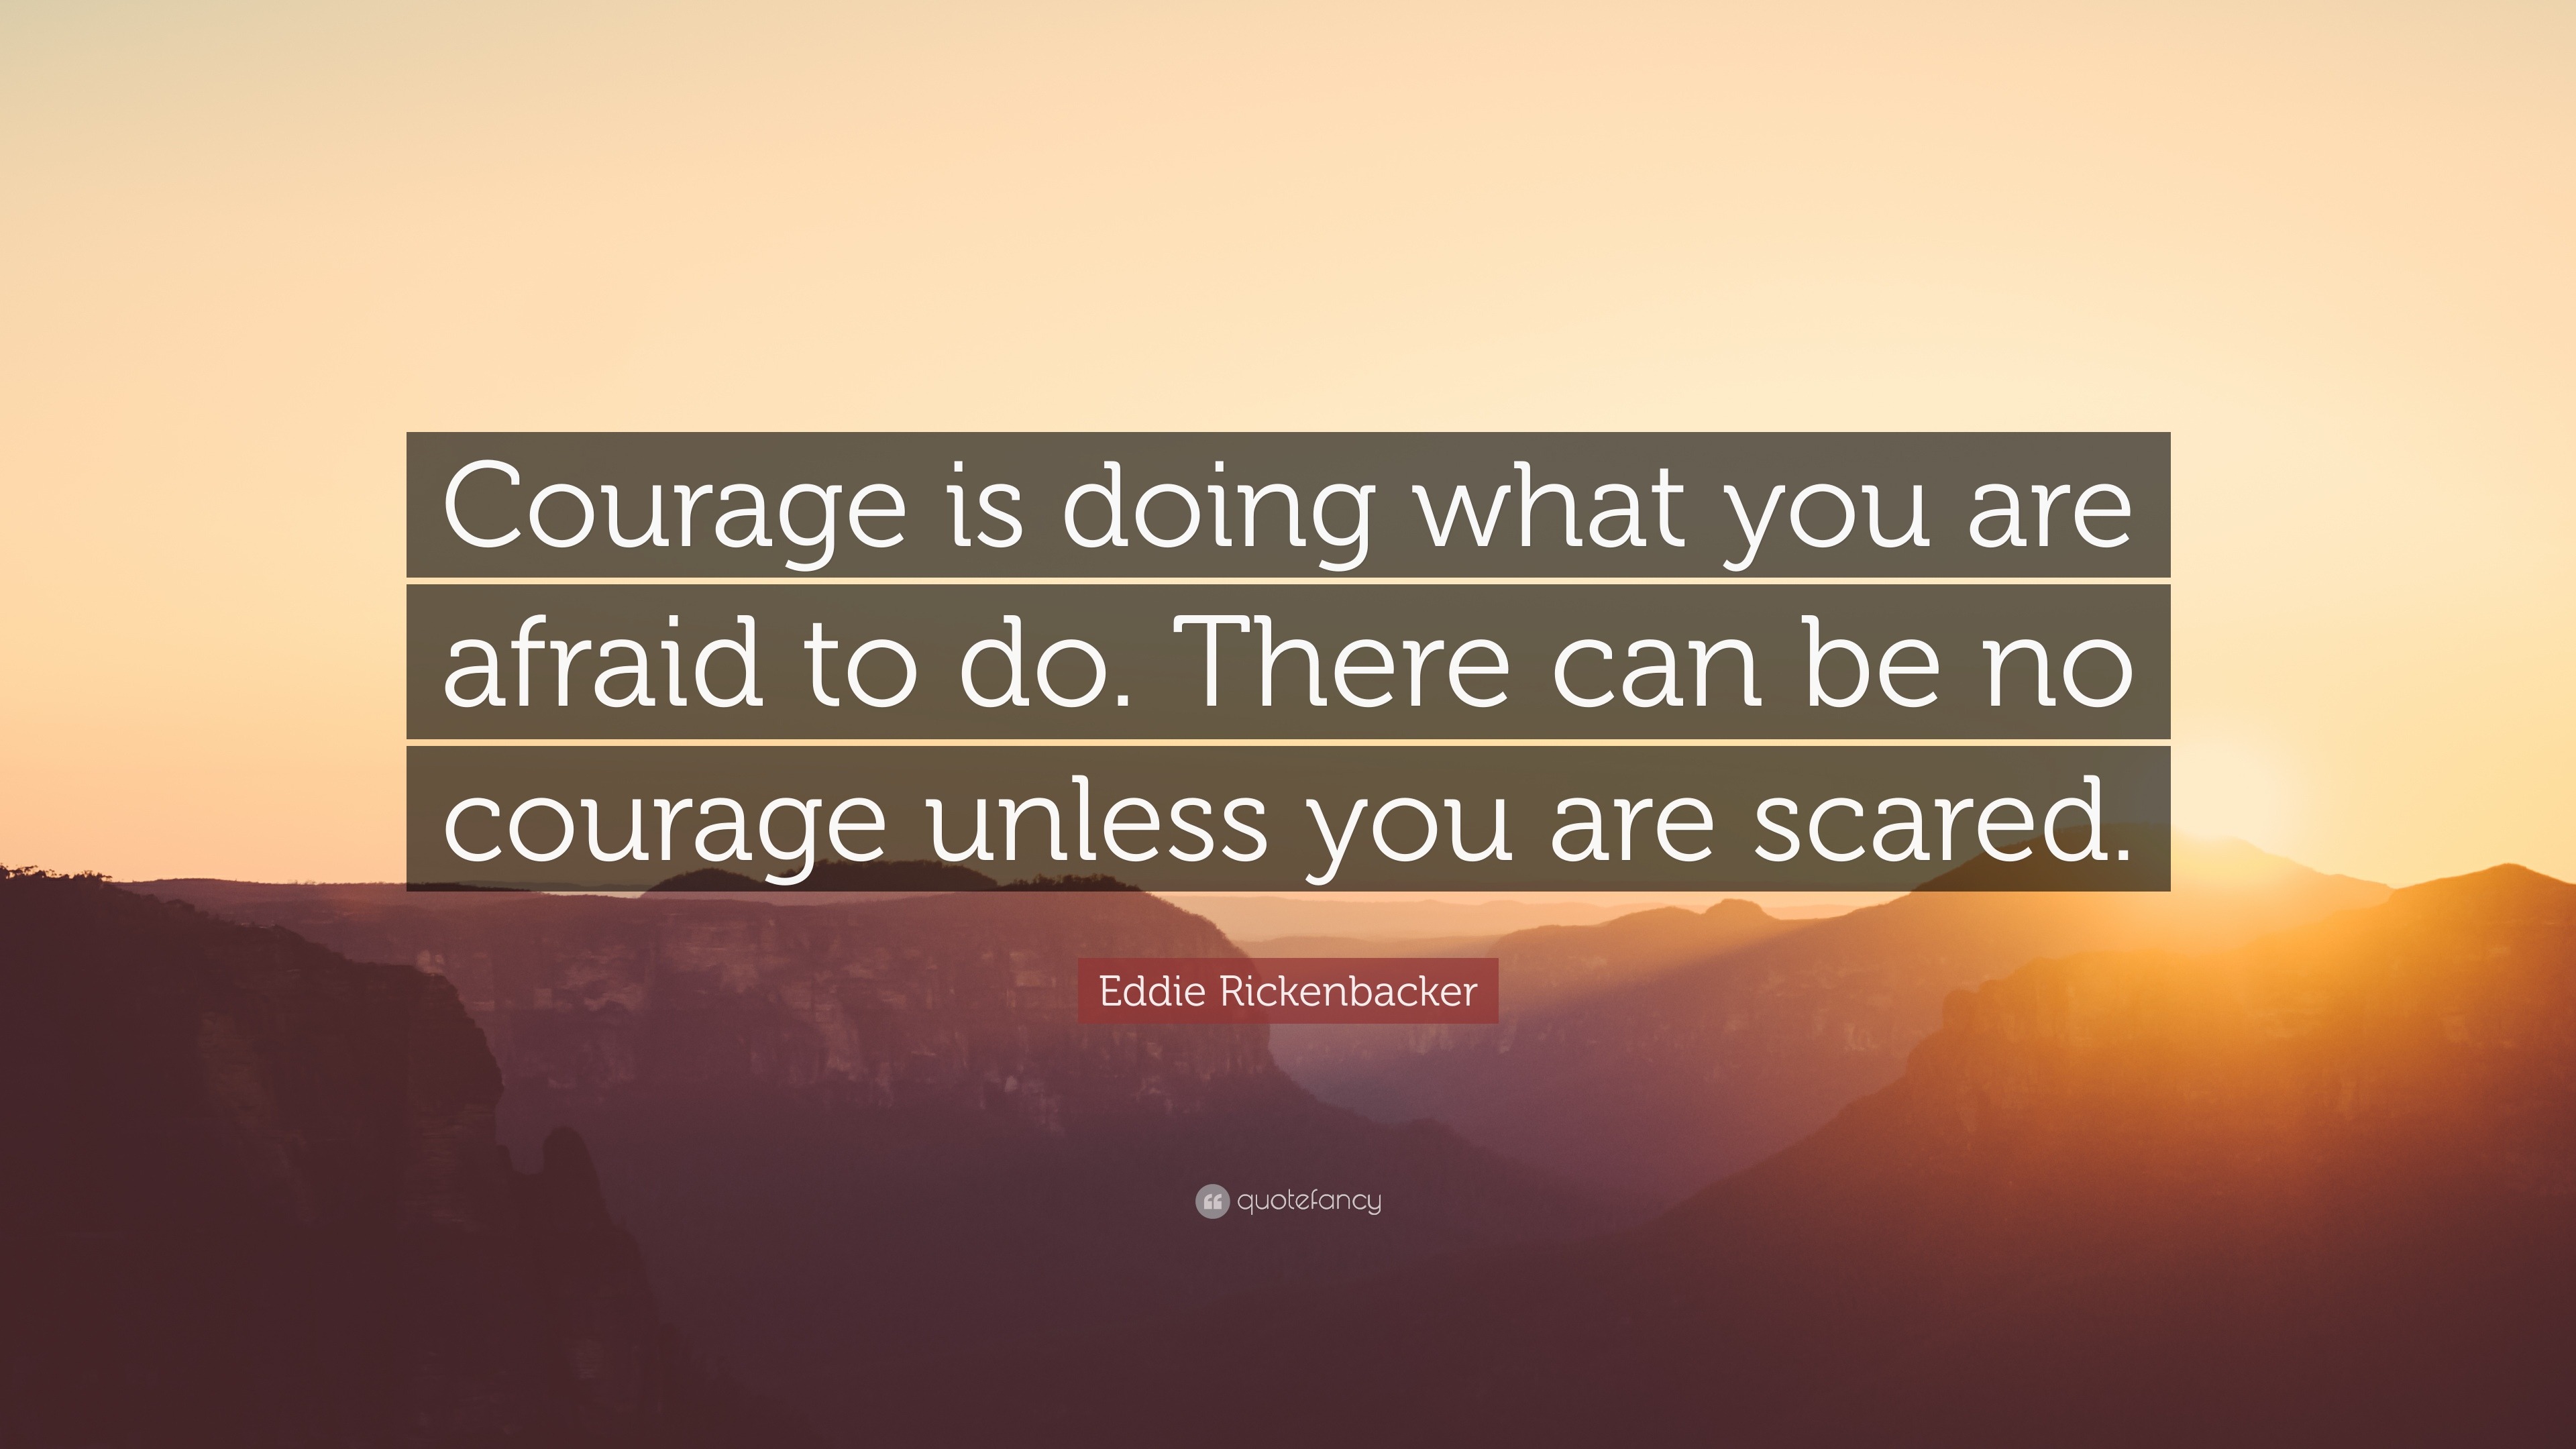 Courage is doing what you are afraid to do. 